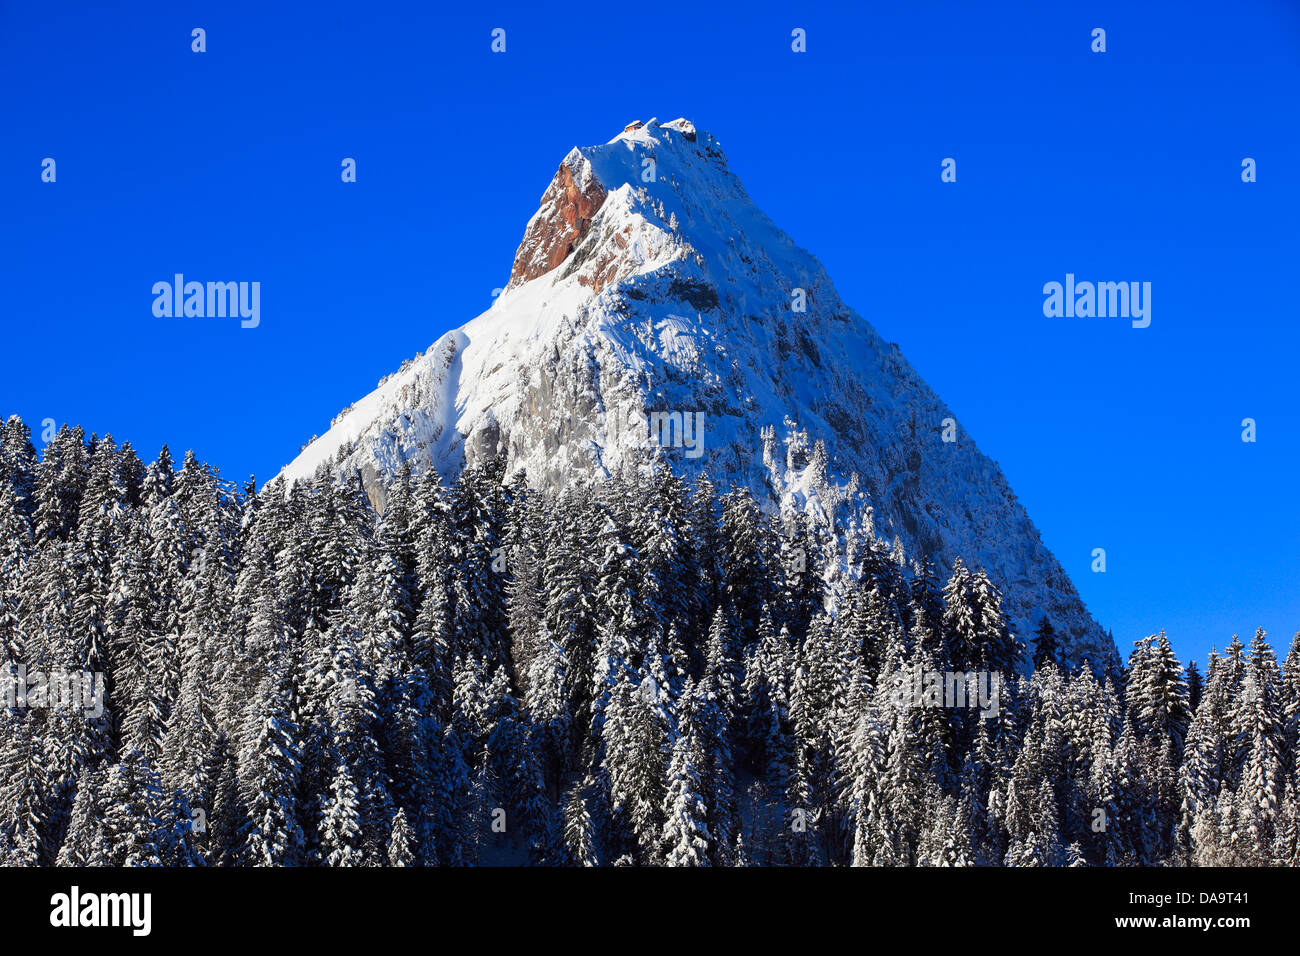 Alps, Alpine, panorama, view, mountain, mountains, massif, trees, spruce, spruces, mountains, summits, peaks, big, Mythen, Centr Stock Photo